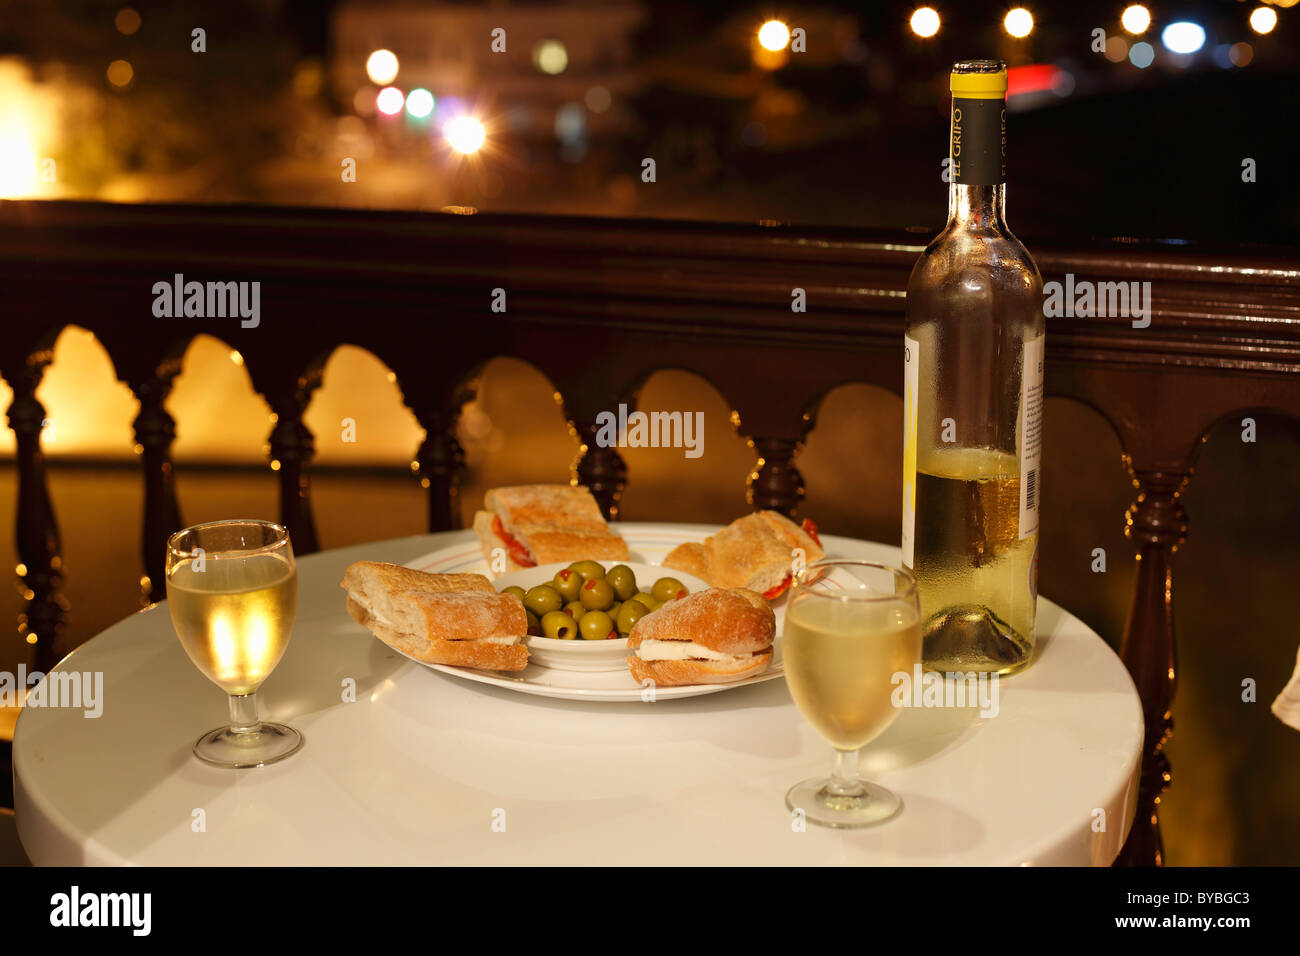 Sandwiches, olives and white wine served on a balcony, La Playa, Valle Gran Rey, La Gomera island, Canary Islands, Spain, Europe Stock Photo